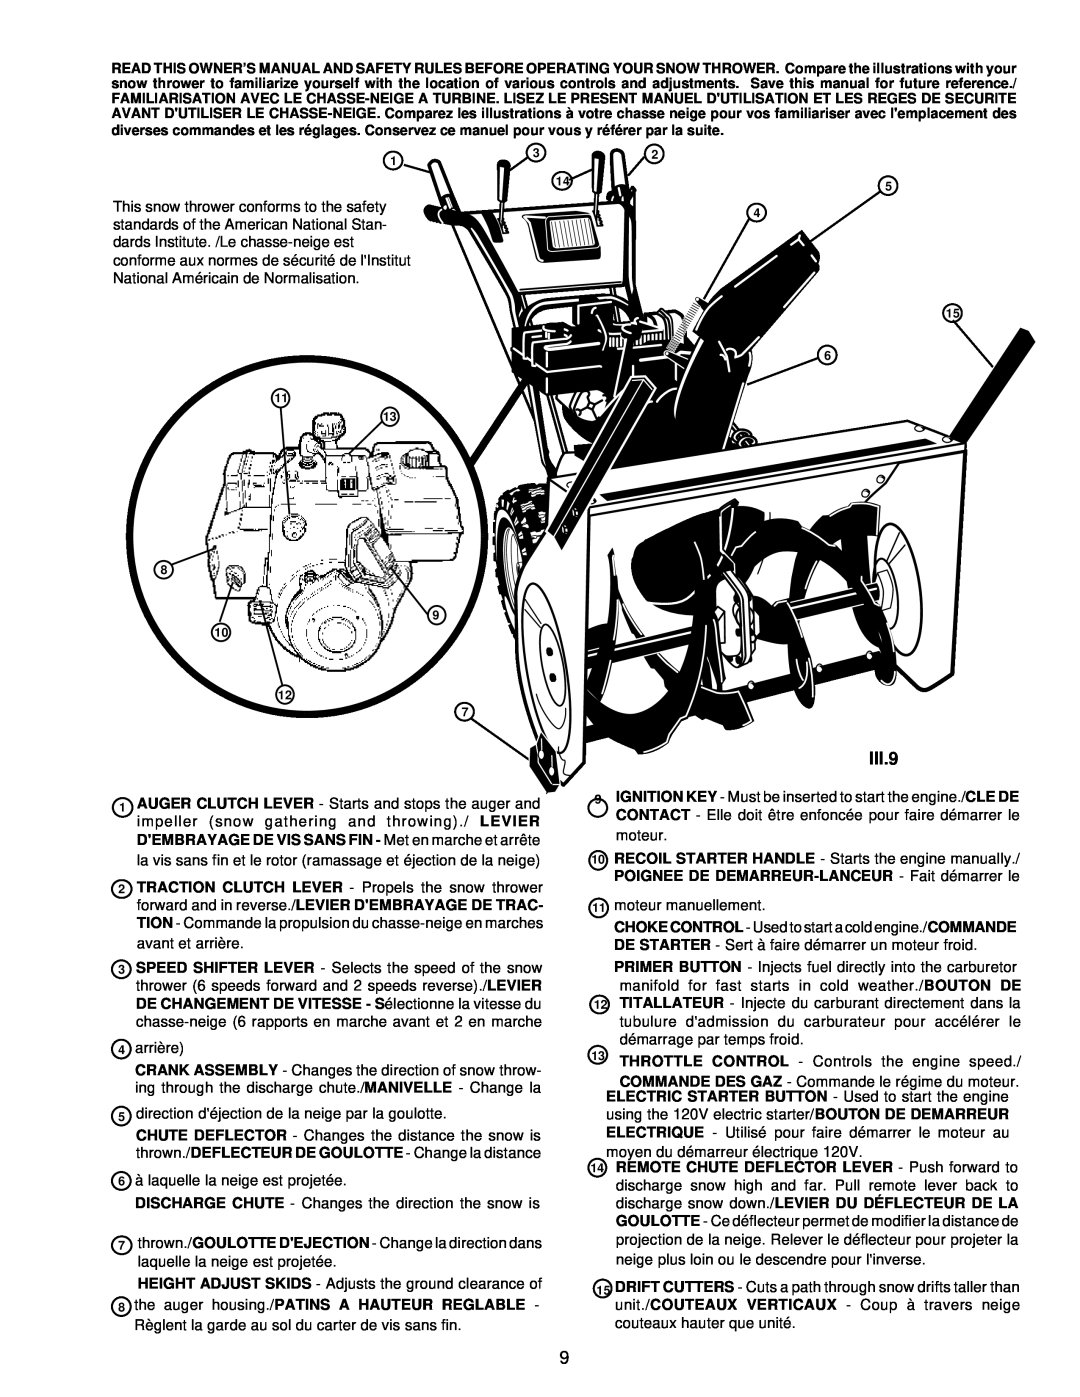 Husqvarna ST724 owner manual III.9, This snow thrower conforms to the safety, standards of the American National Stan 